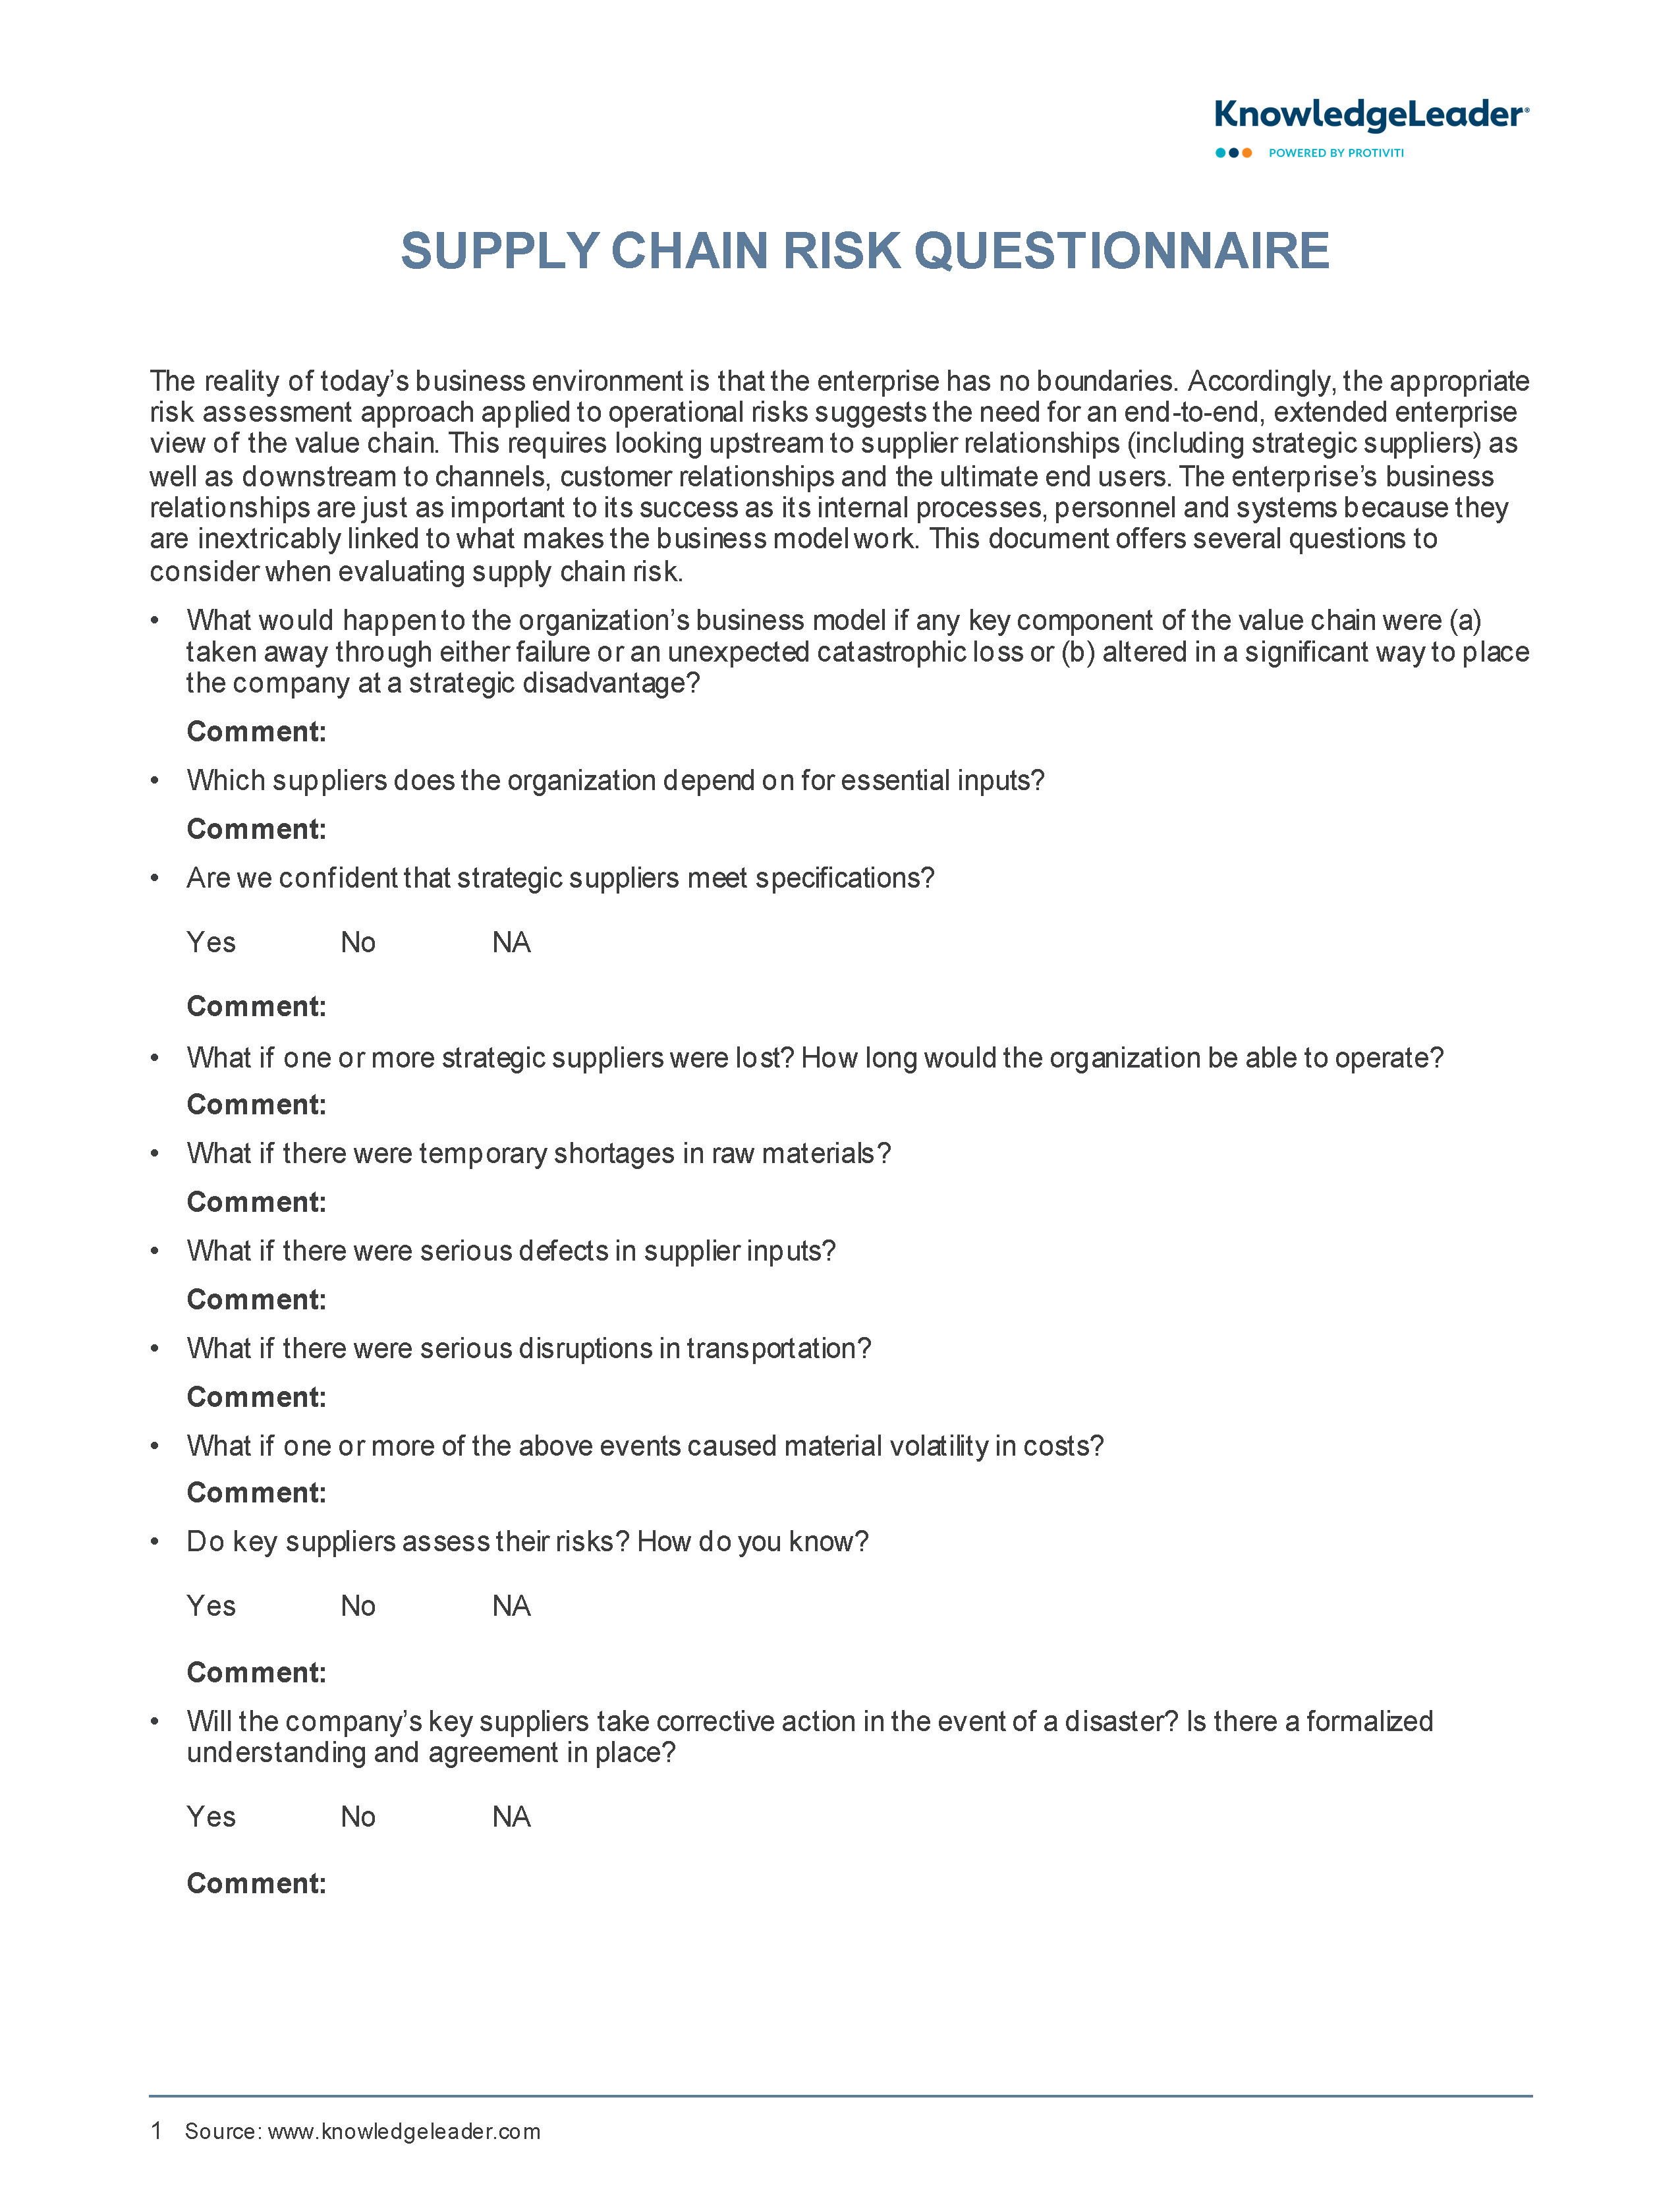 Screenshot of the first page of Supply Chain Risk Questionnaire